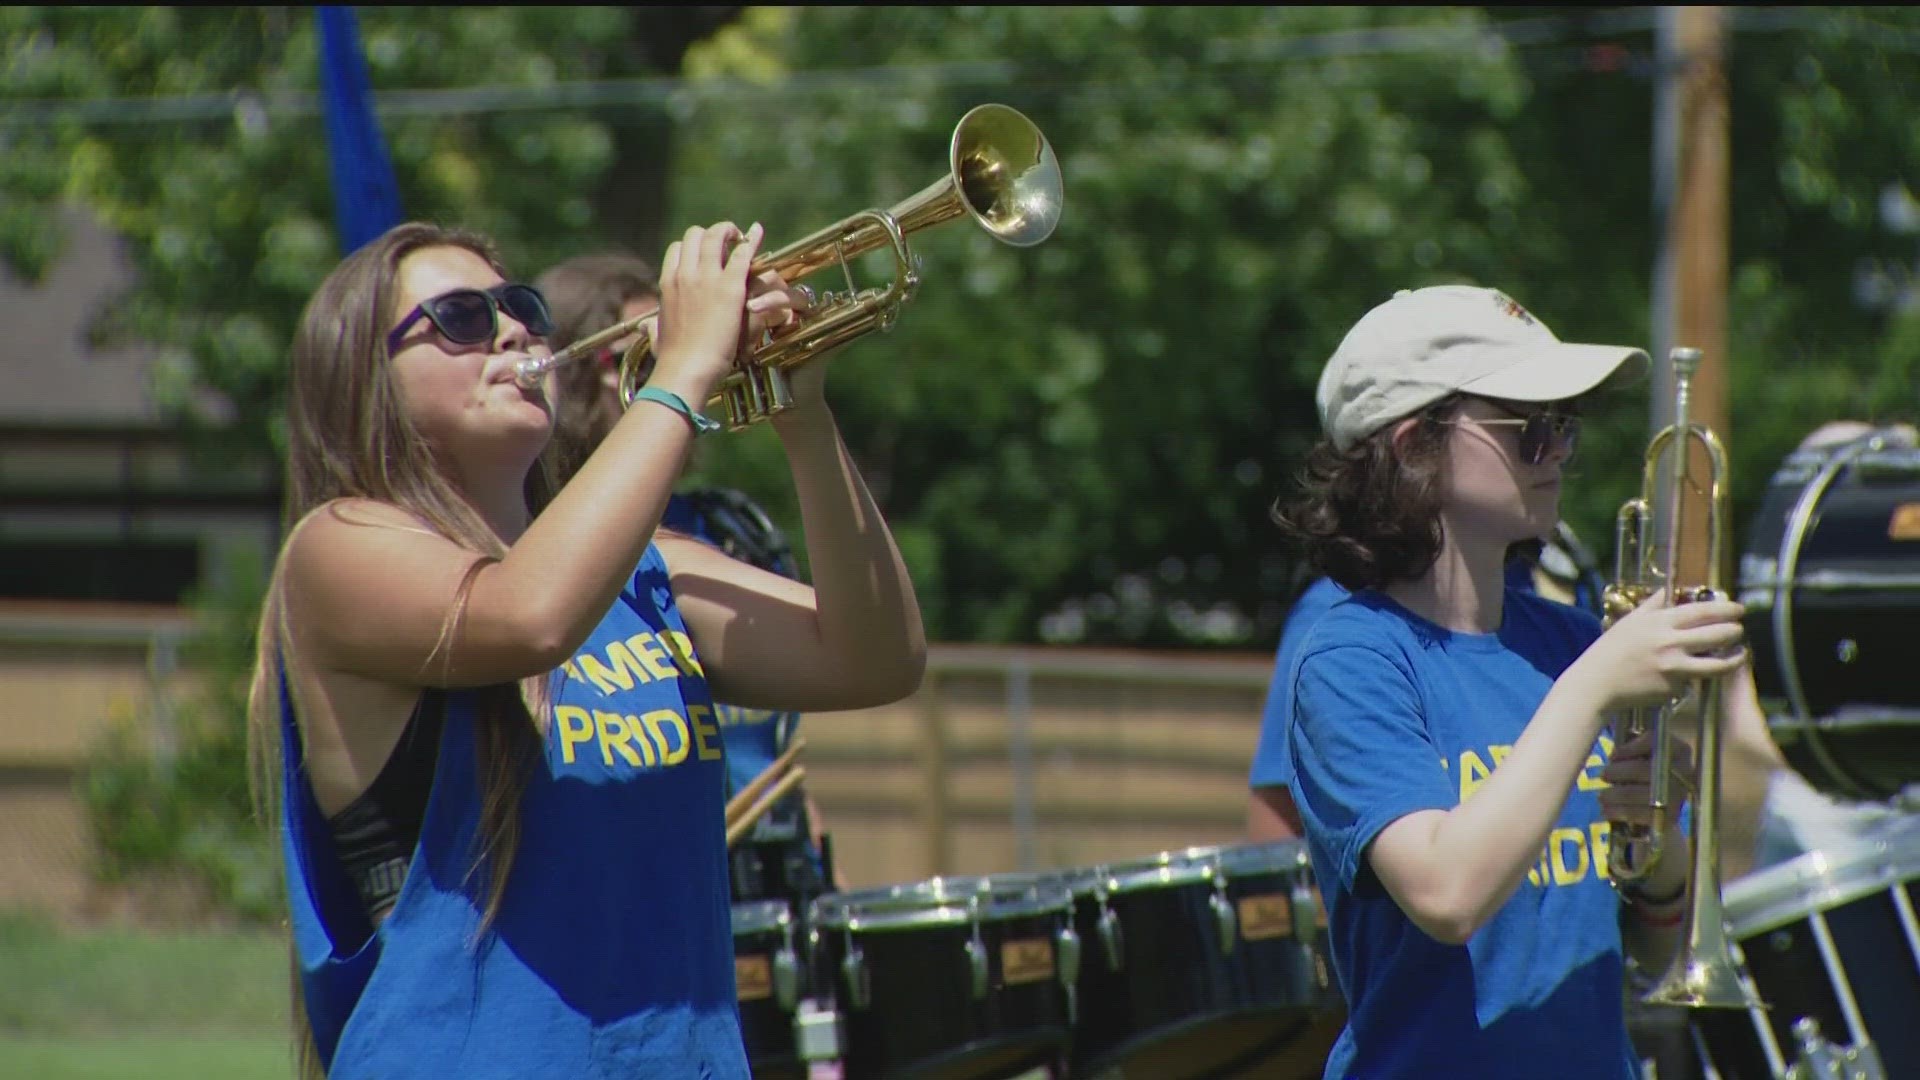 The 'Farmer Pride' marching band is taking the field for competition for the first time in more than a decade.